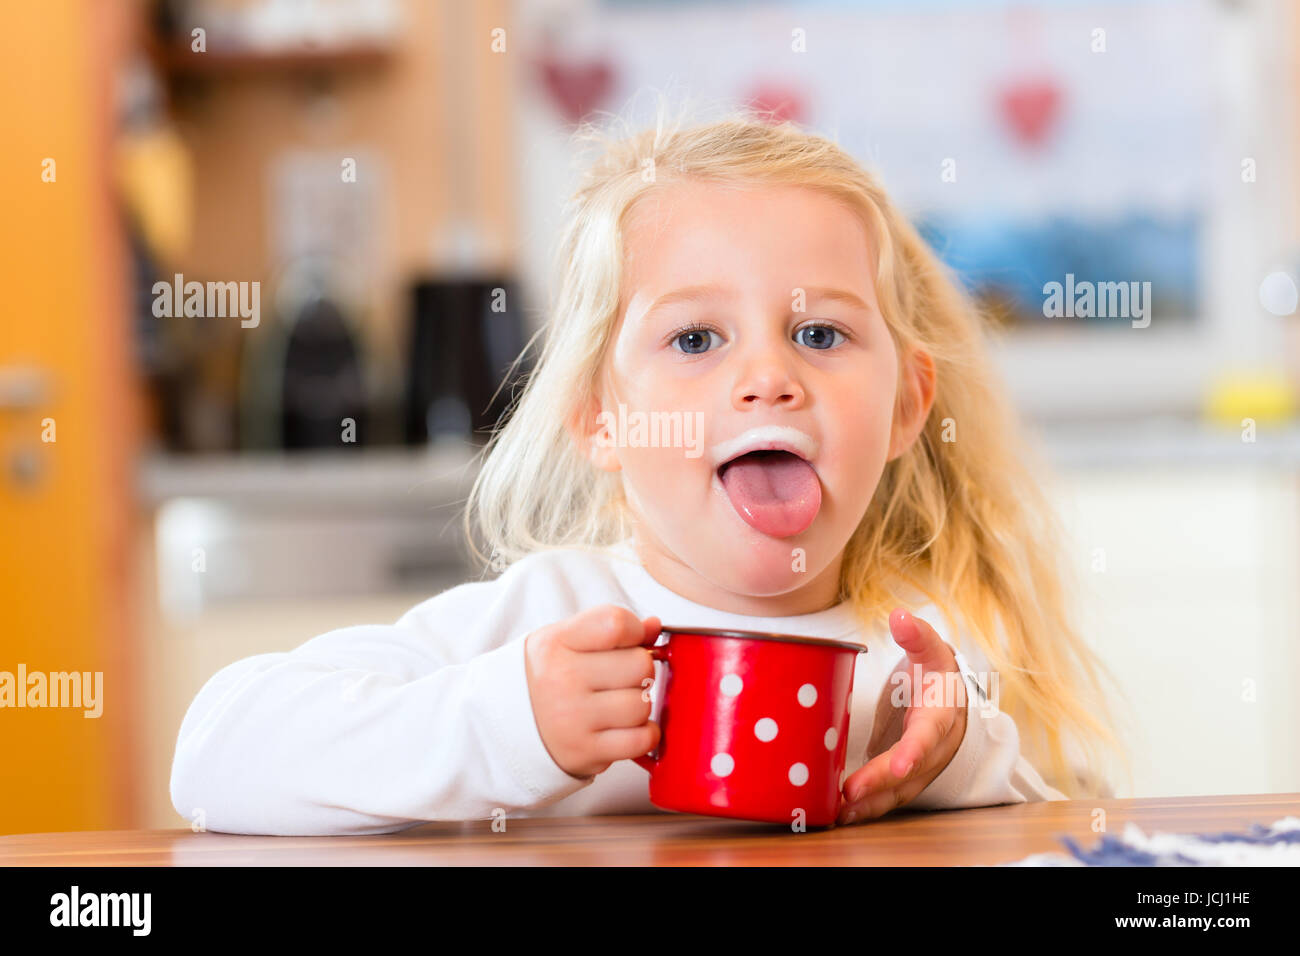 child drinking cup or mug of milk in the domestic kitchen Stock